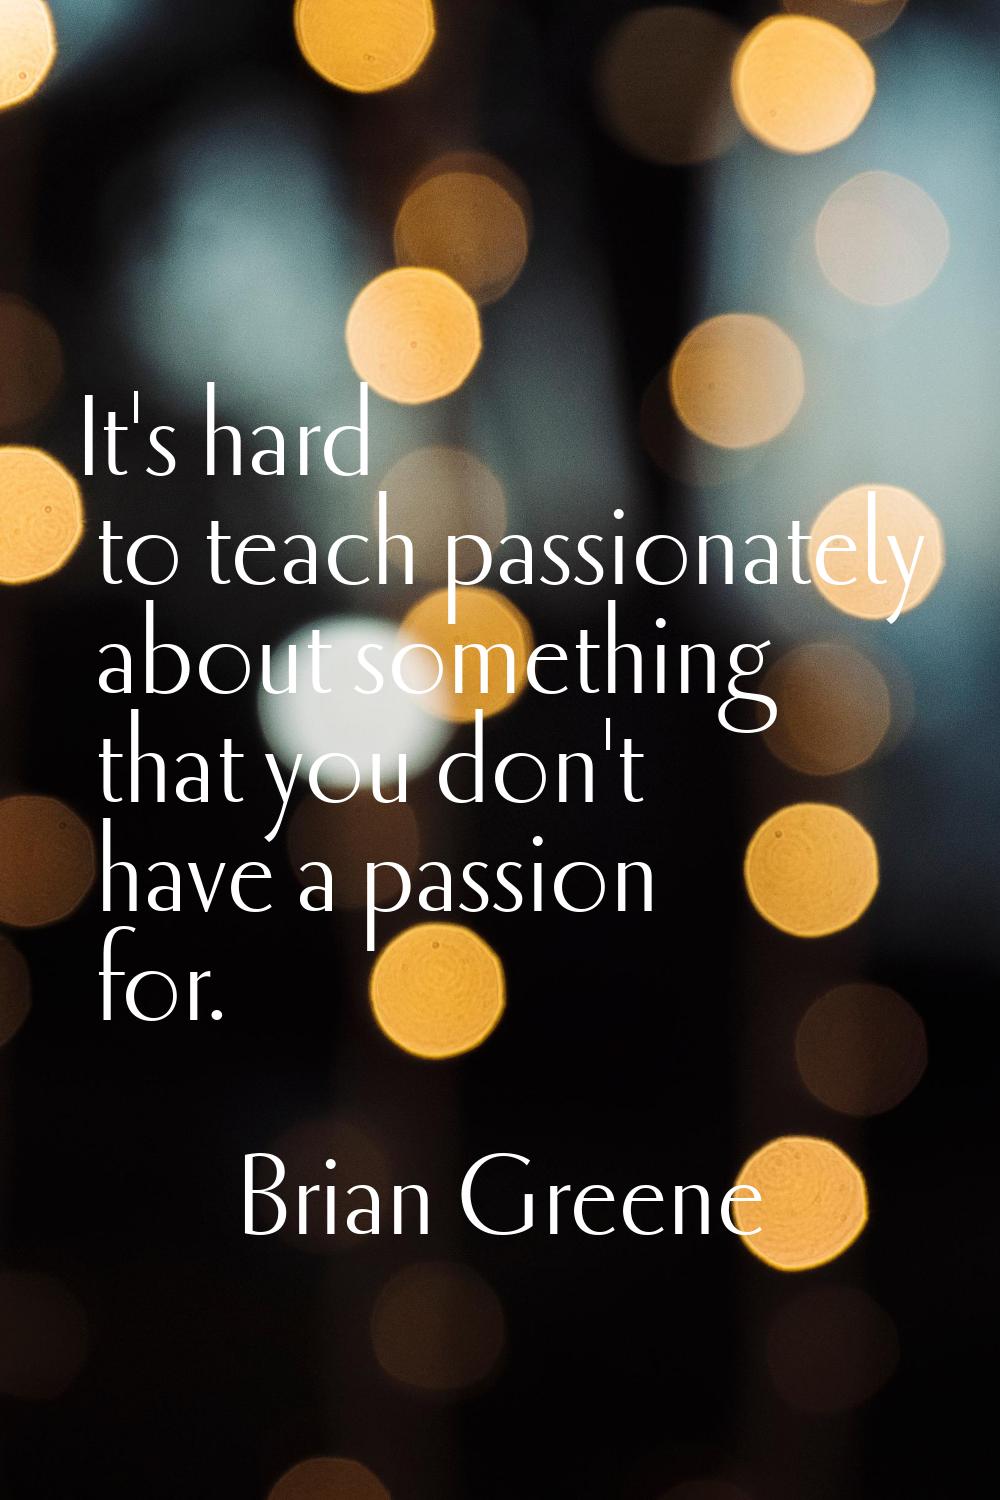 It's hard to teach passionately about something that you don't have a passion for.